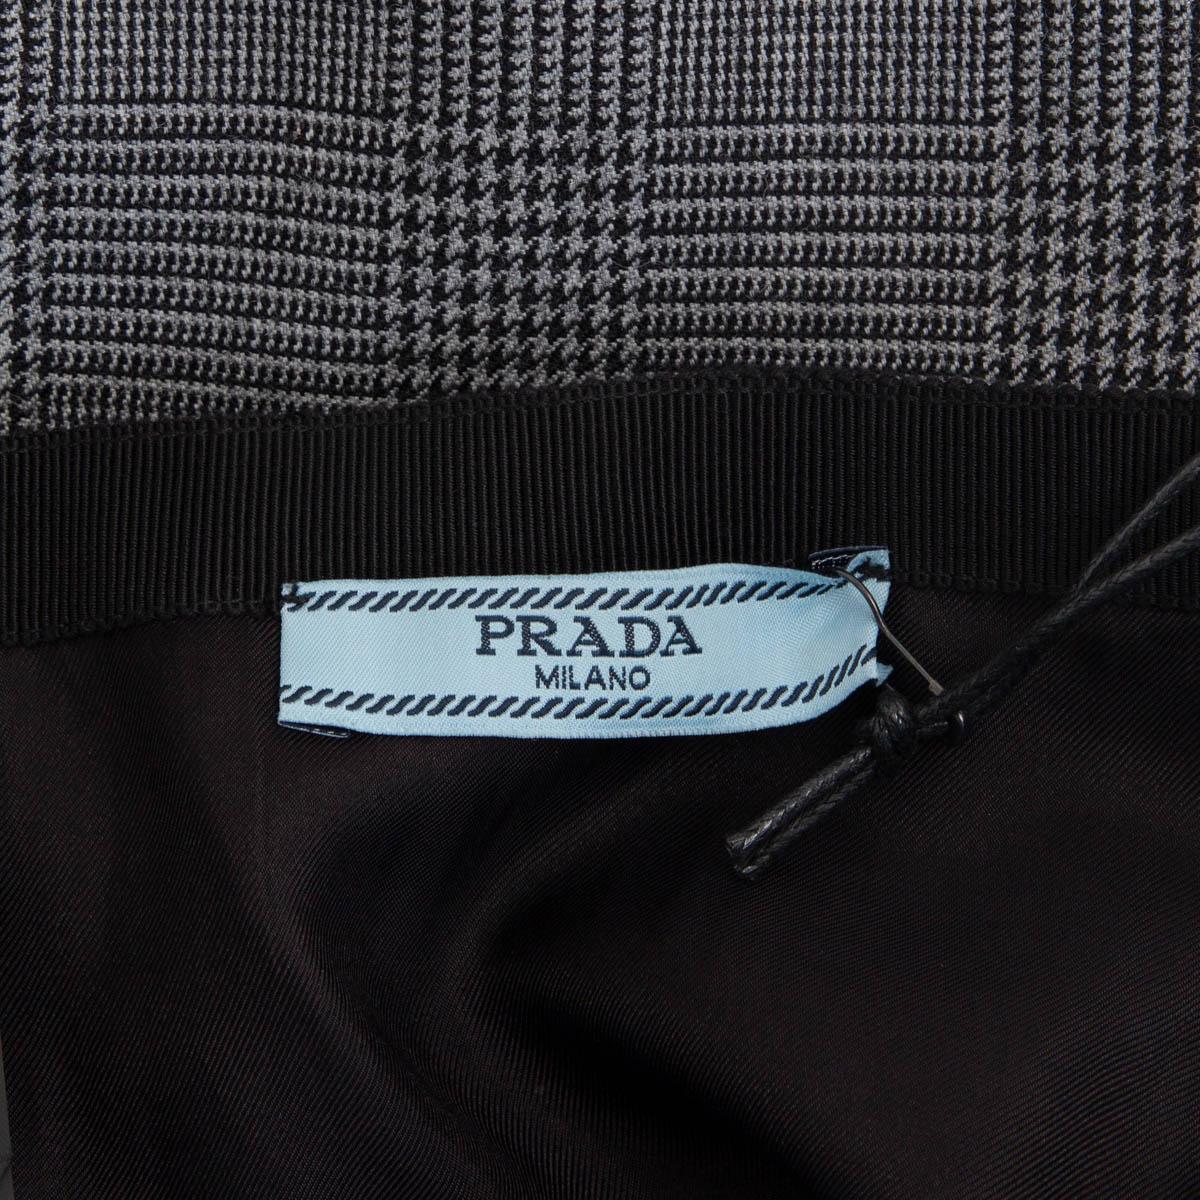 PRADA grey black wool HOUNDSTOOTH PLAID Skirt 40 S In Excellent Condition For Sale In Zürich, CH